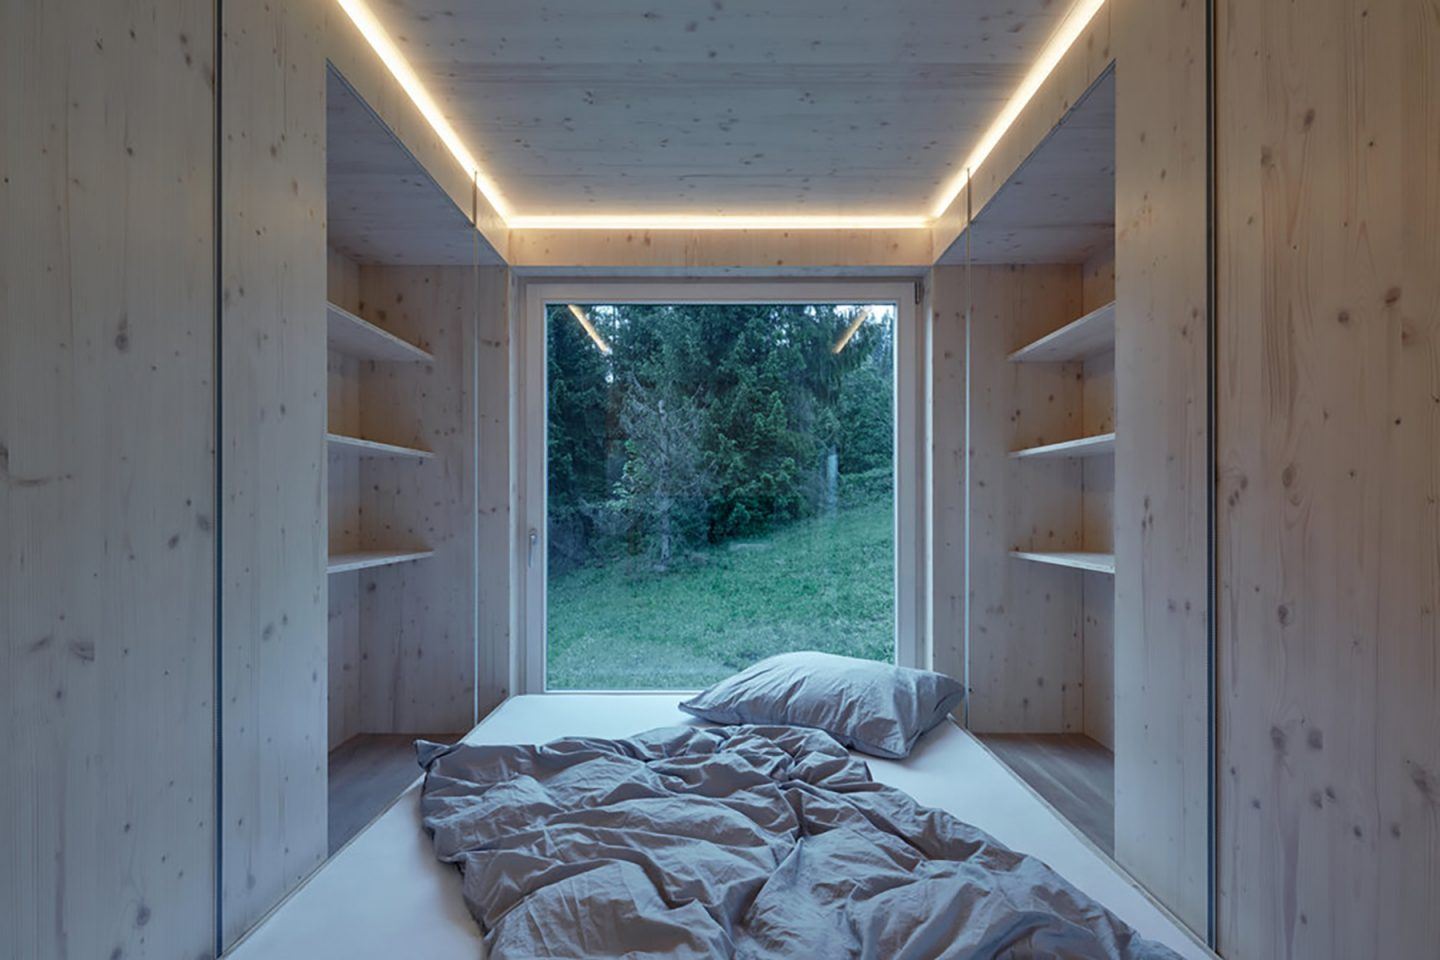 IGNANT-Architecture-Ark-Shelter-Into-The-Wild-13